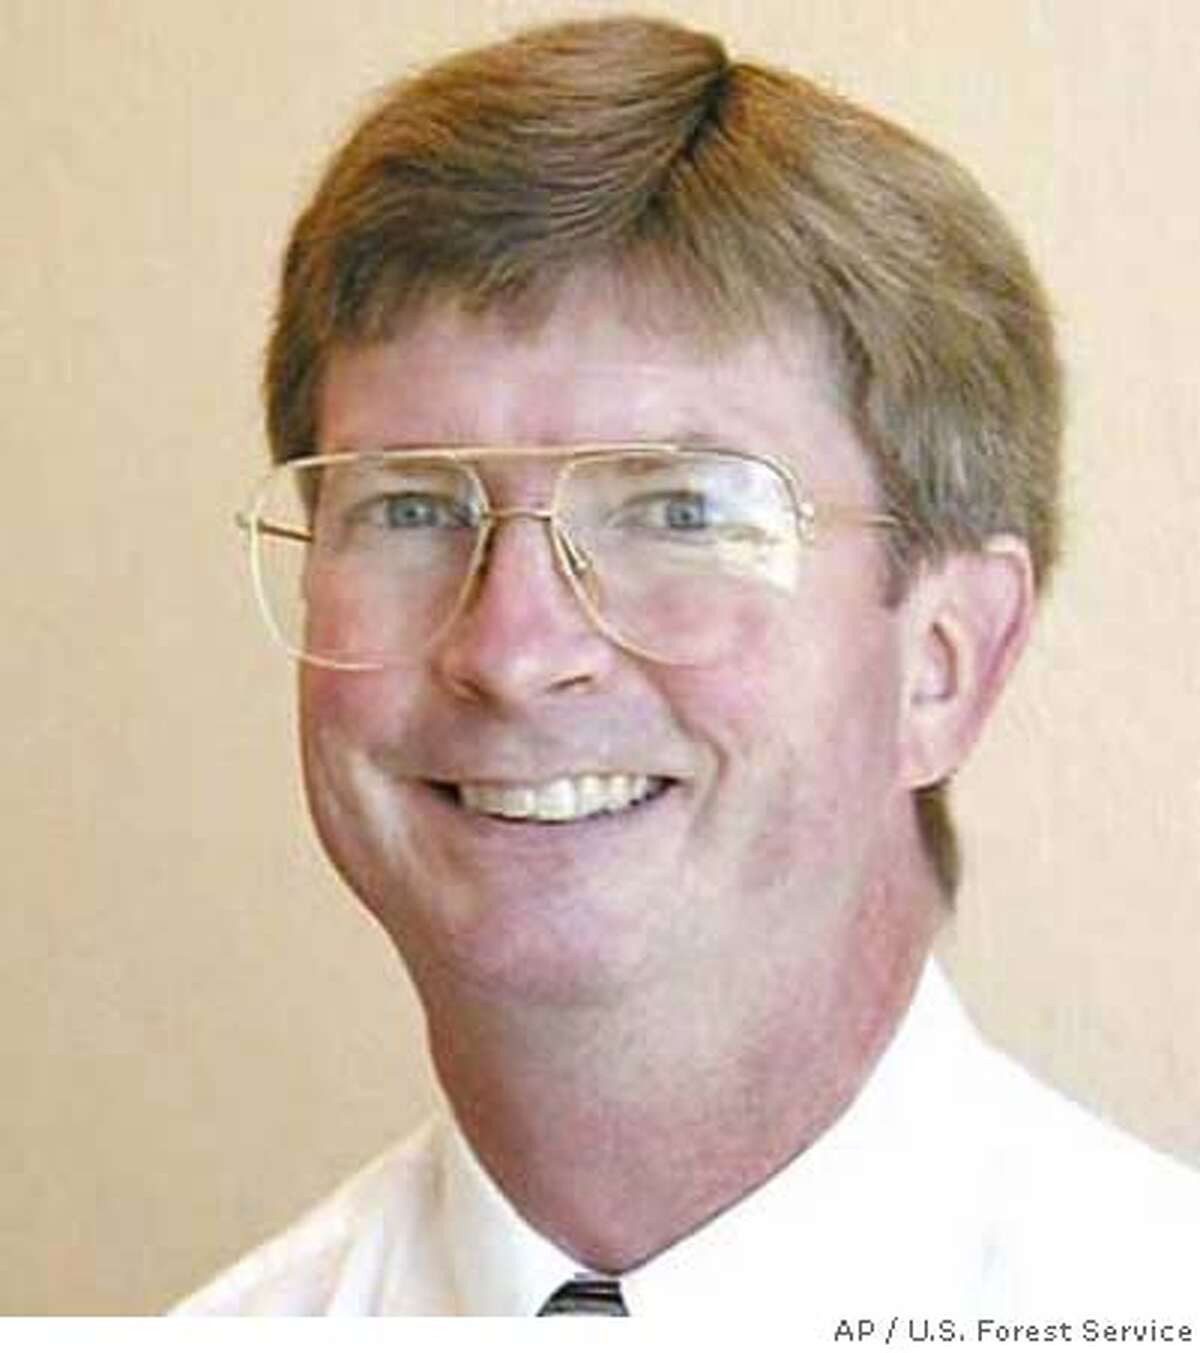 This undated photo released by the U.S. Forest Service shows Matt Mathes, the long-serving public voice of the U.S. Forest Service in California who police say shot his ailing wife and himself to death. Mathes, 54, and his wife, 52-year-old Karen Pang Mathes, were found dead in their Northern California home on Saturday, Nov.3, 2007, from gunshot wounds.(AP Photo/U.S. Forest Service ) DATE OF PHOTO UNKNOWN.PHOTO RELEASED BY THE U.S. FOREST SERVICE